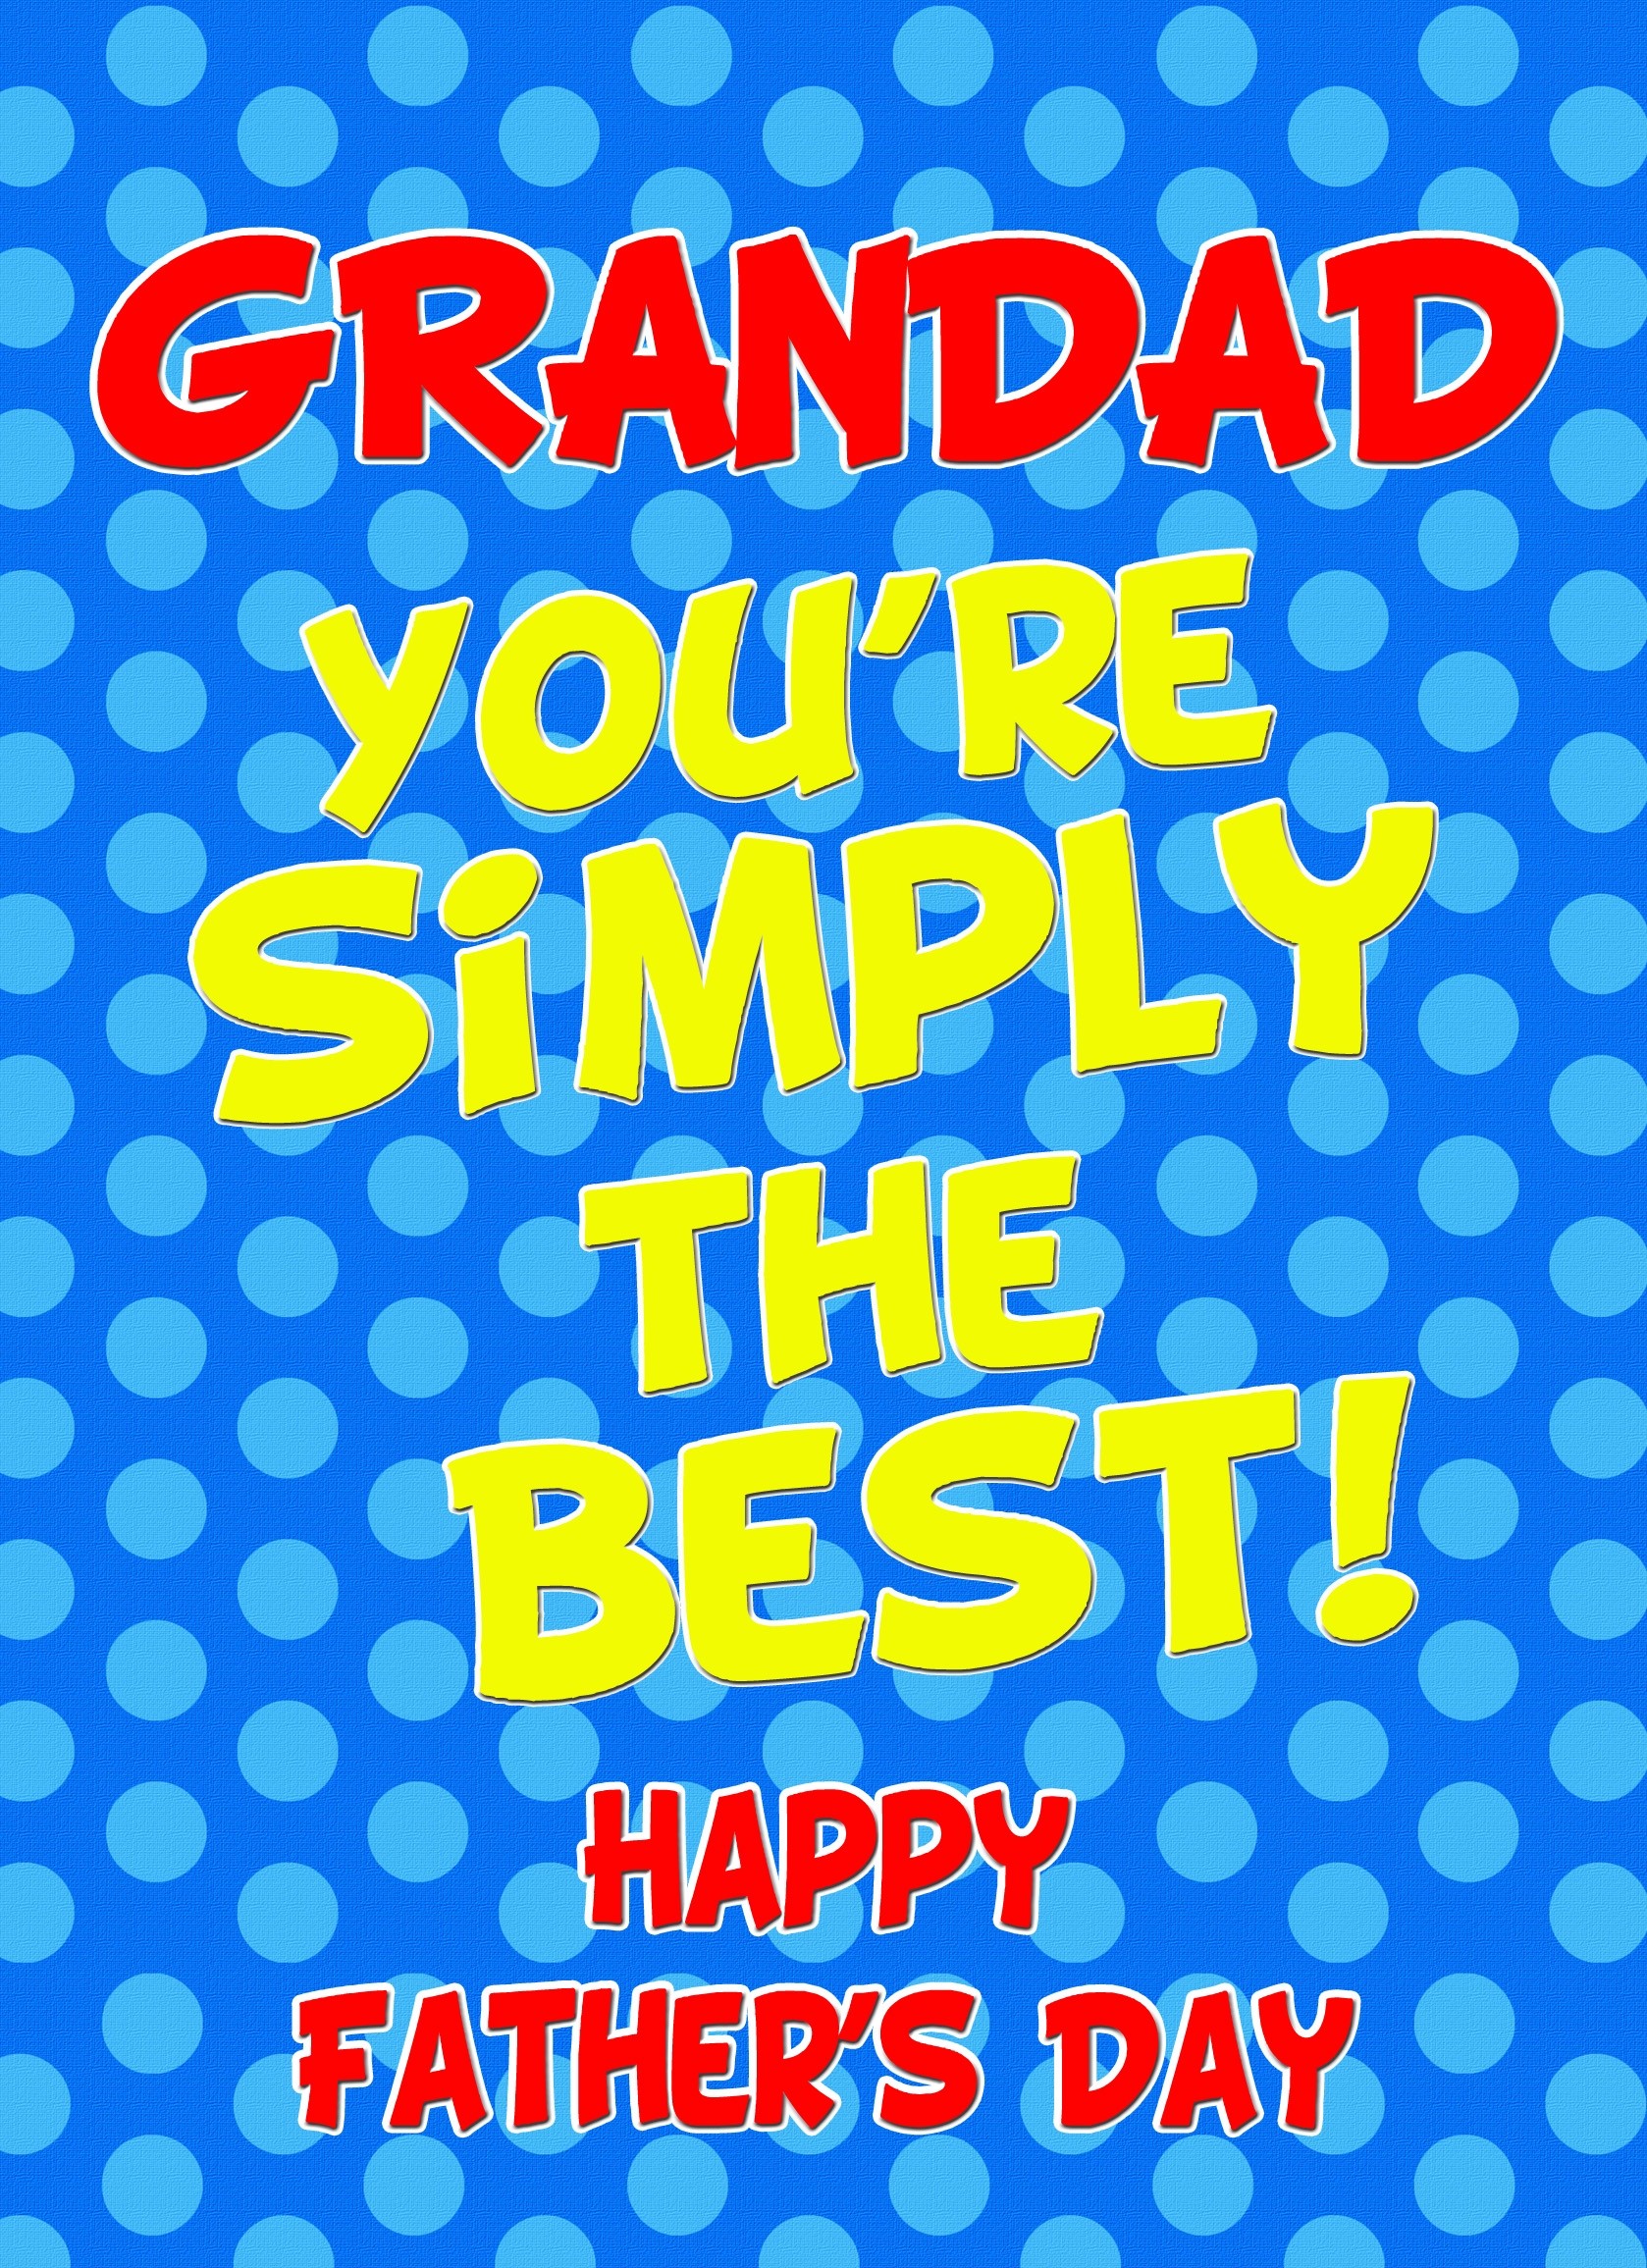 Fathers Day Card (Grandad, Simply the Best)